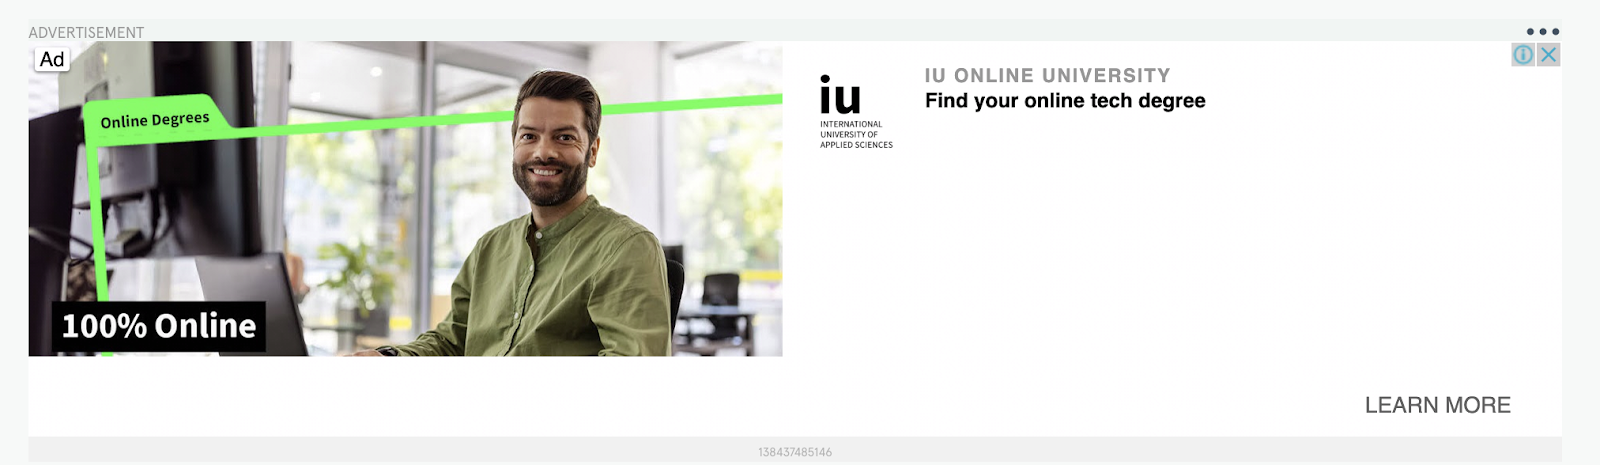 IU online university's ad for an online tech degree